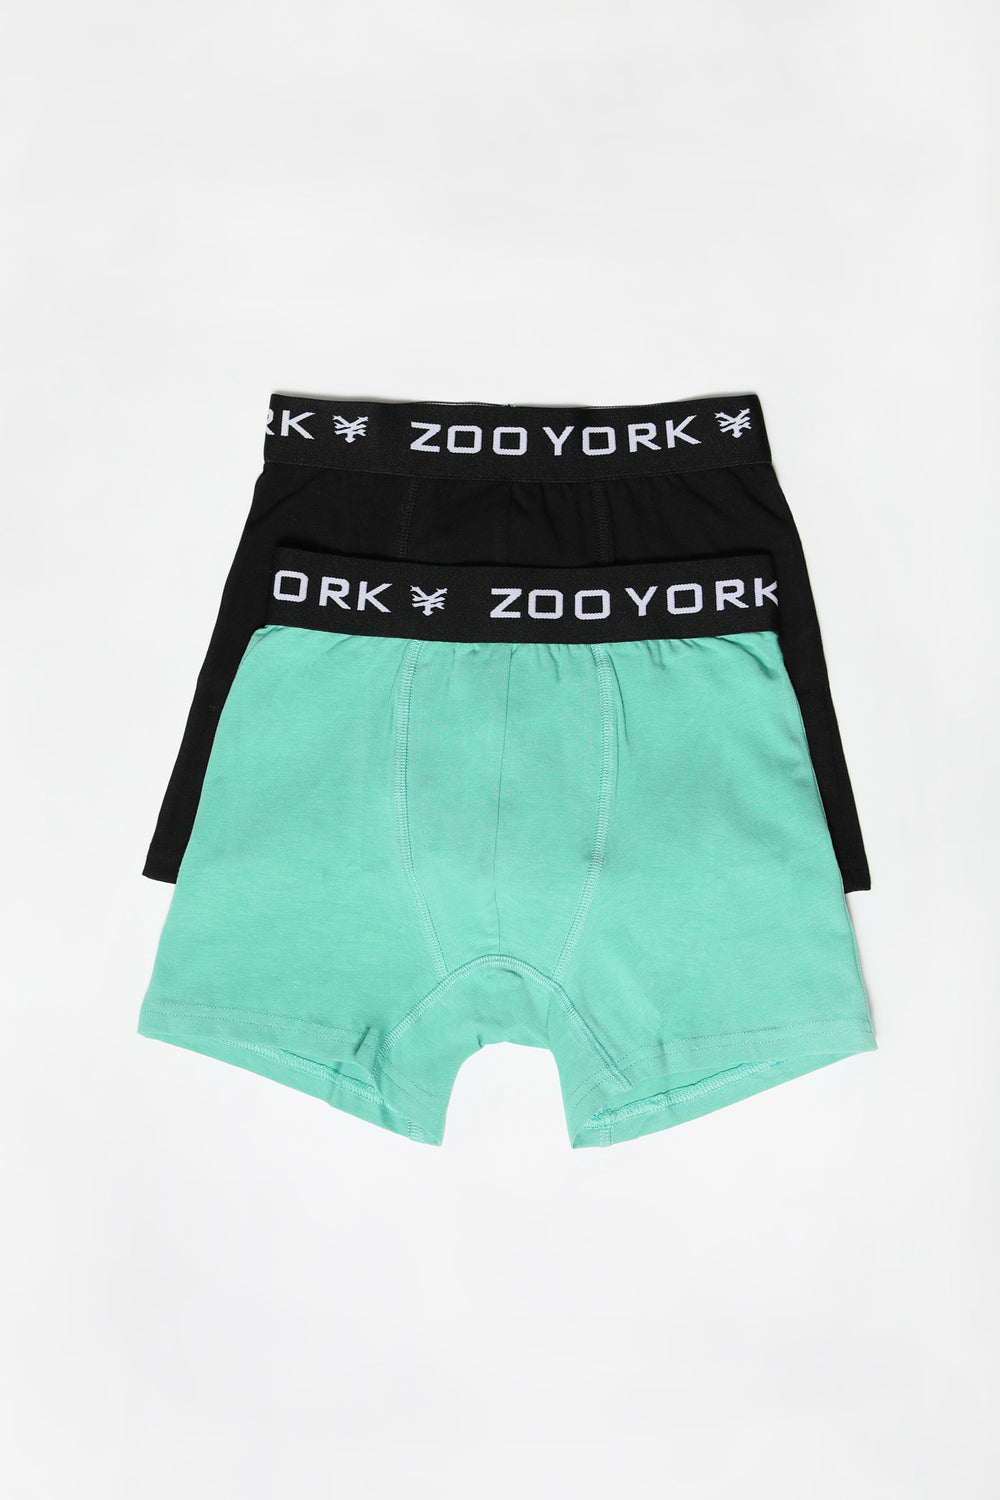 Zoo York Youth 2-Pack Boxer Briefs Zoo York Youth 2-Pack Boxer Briefs